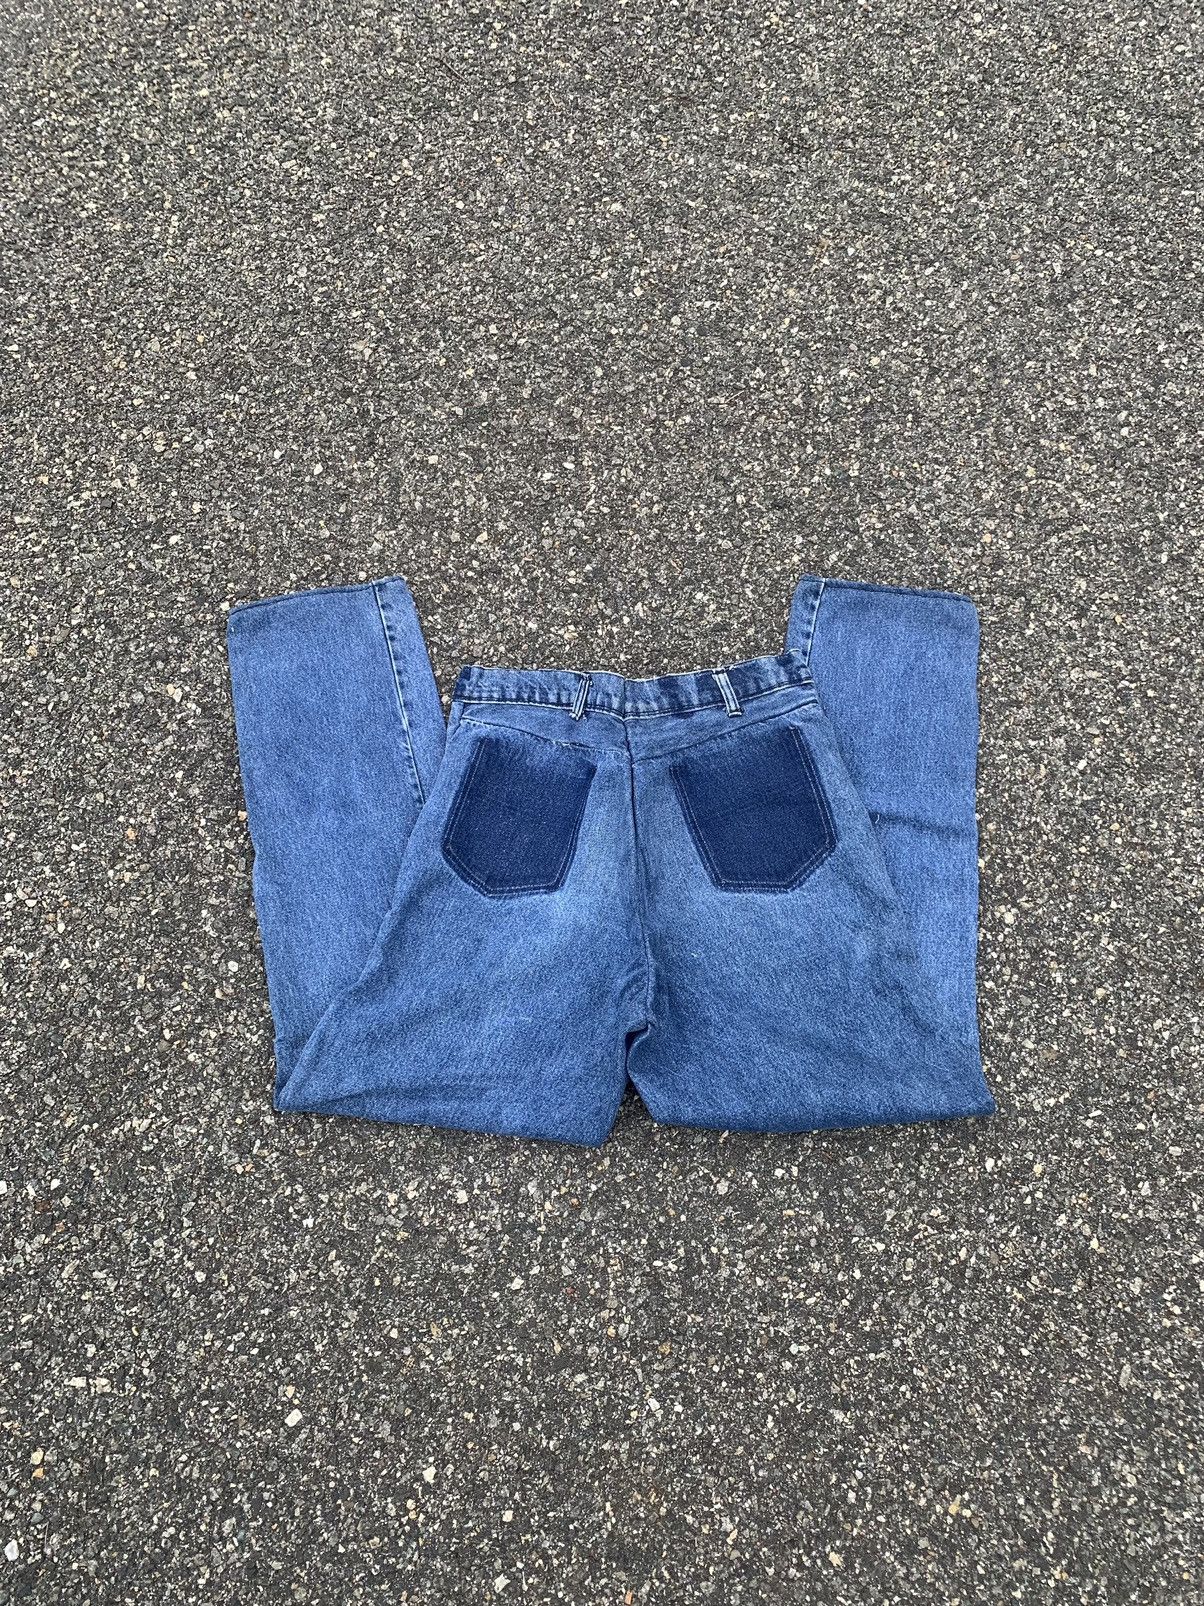 Hype no pocket blue jeans 36x31 relaxed fit Size US 36 / EU 52 - 3 Thumbnail